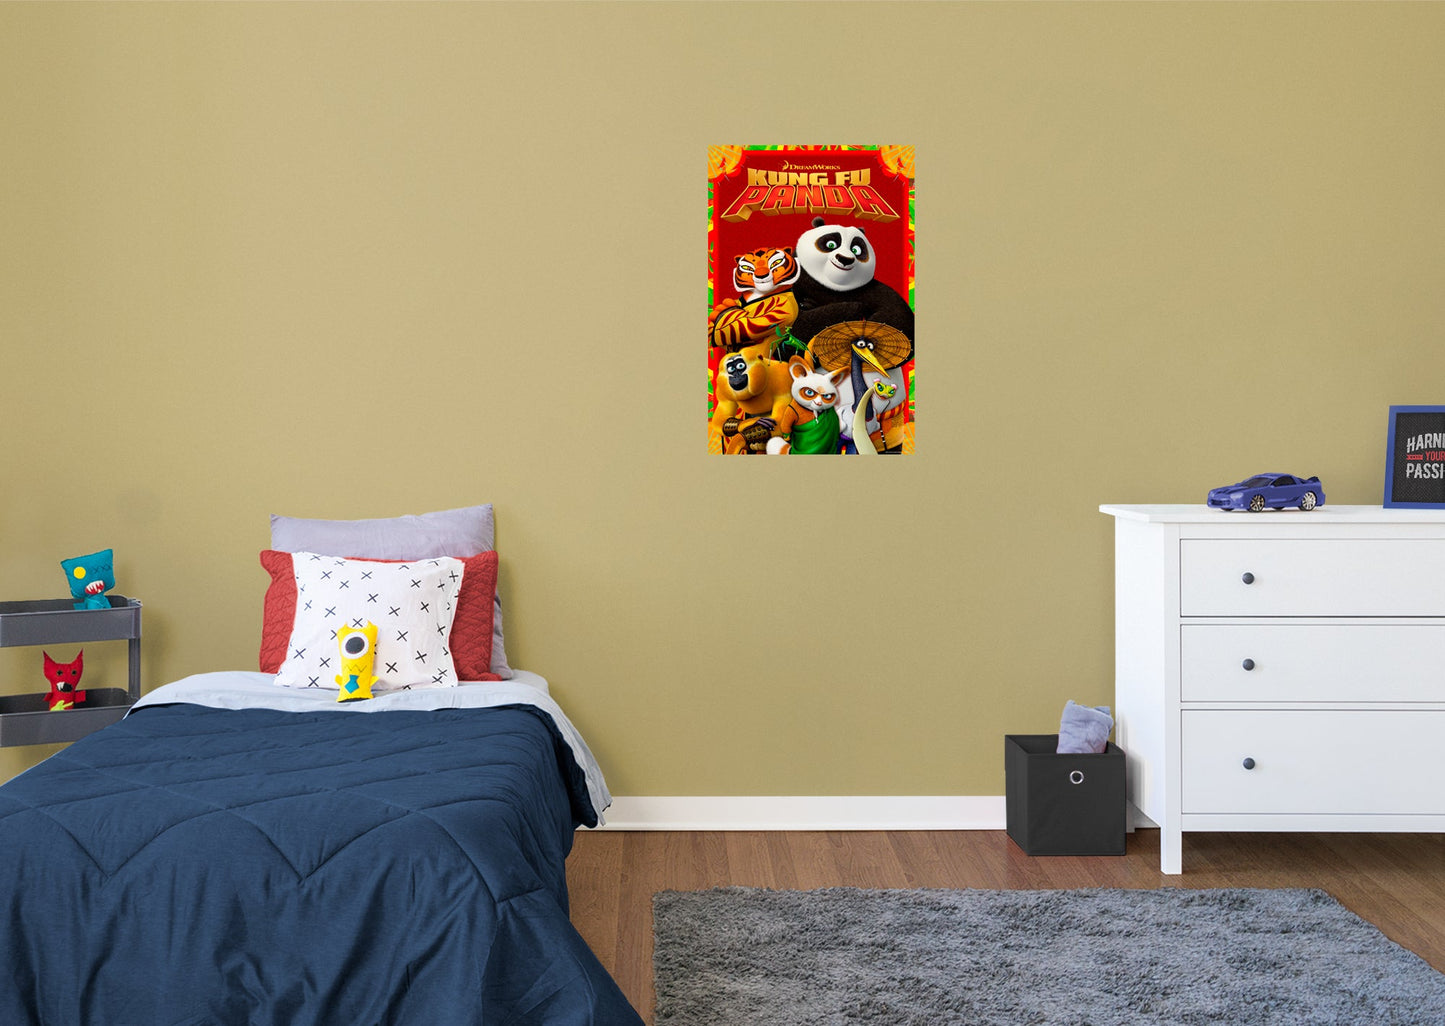 Kung Fu Panda:  Movie Poster Mural        - Officially Licensed NBC Universal Removable Wall   Adhesive Decal